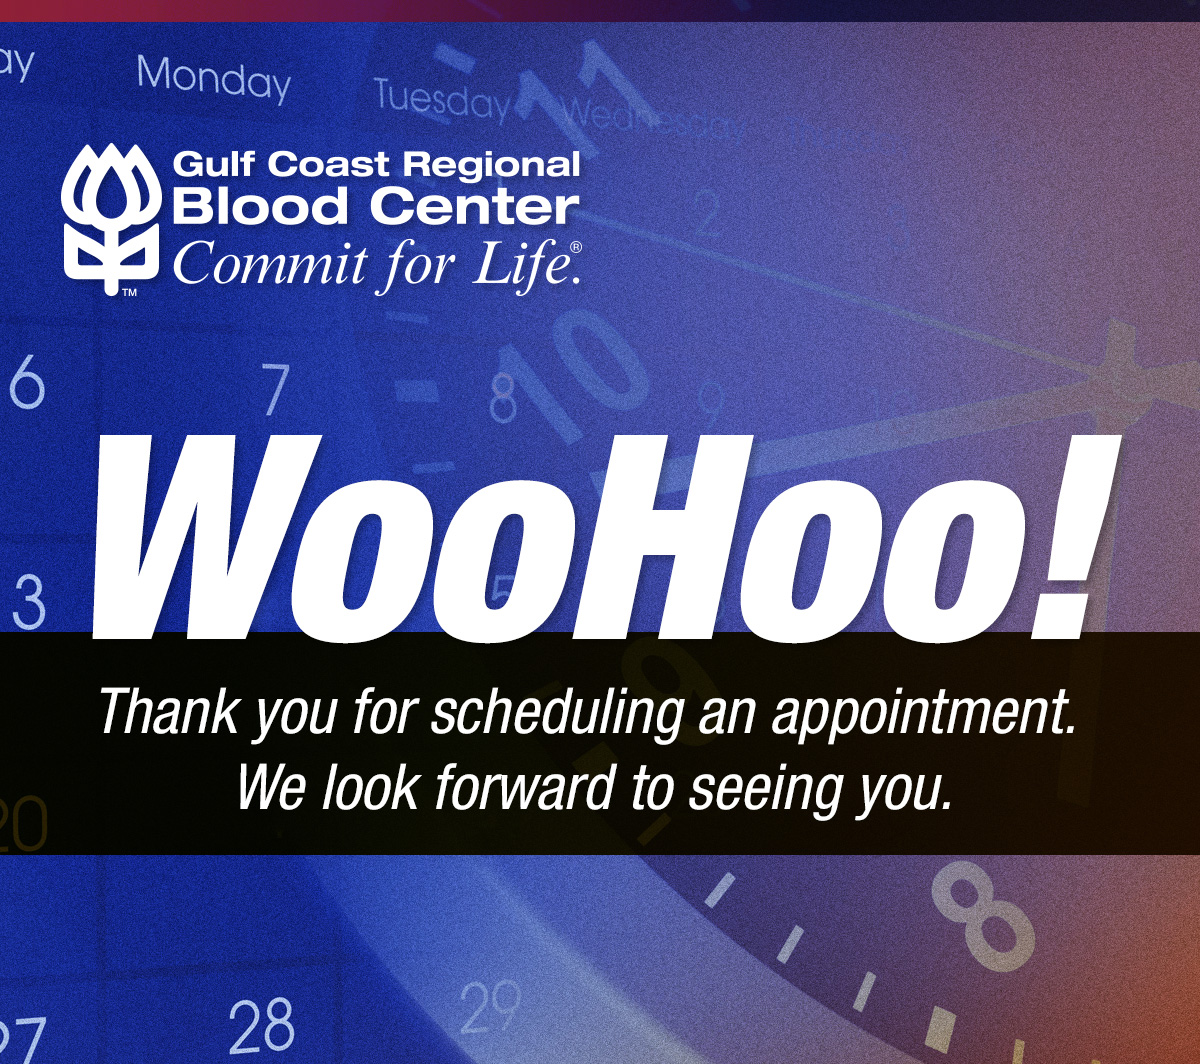 Thank you for scheduling an appointment. We look forward to seeing you.